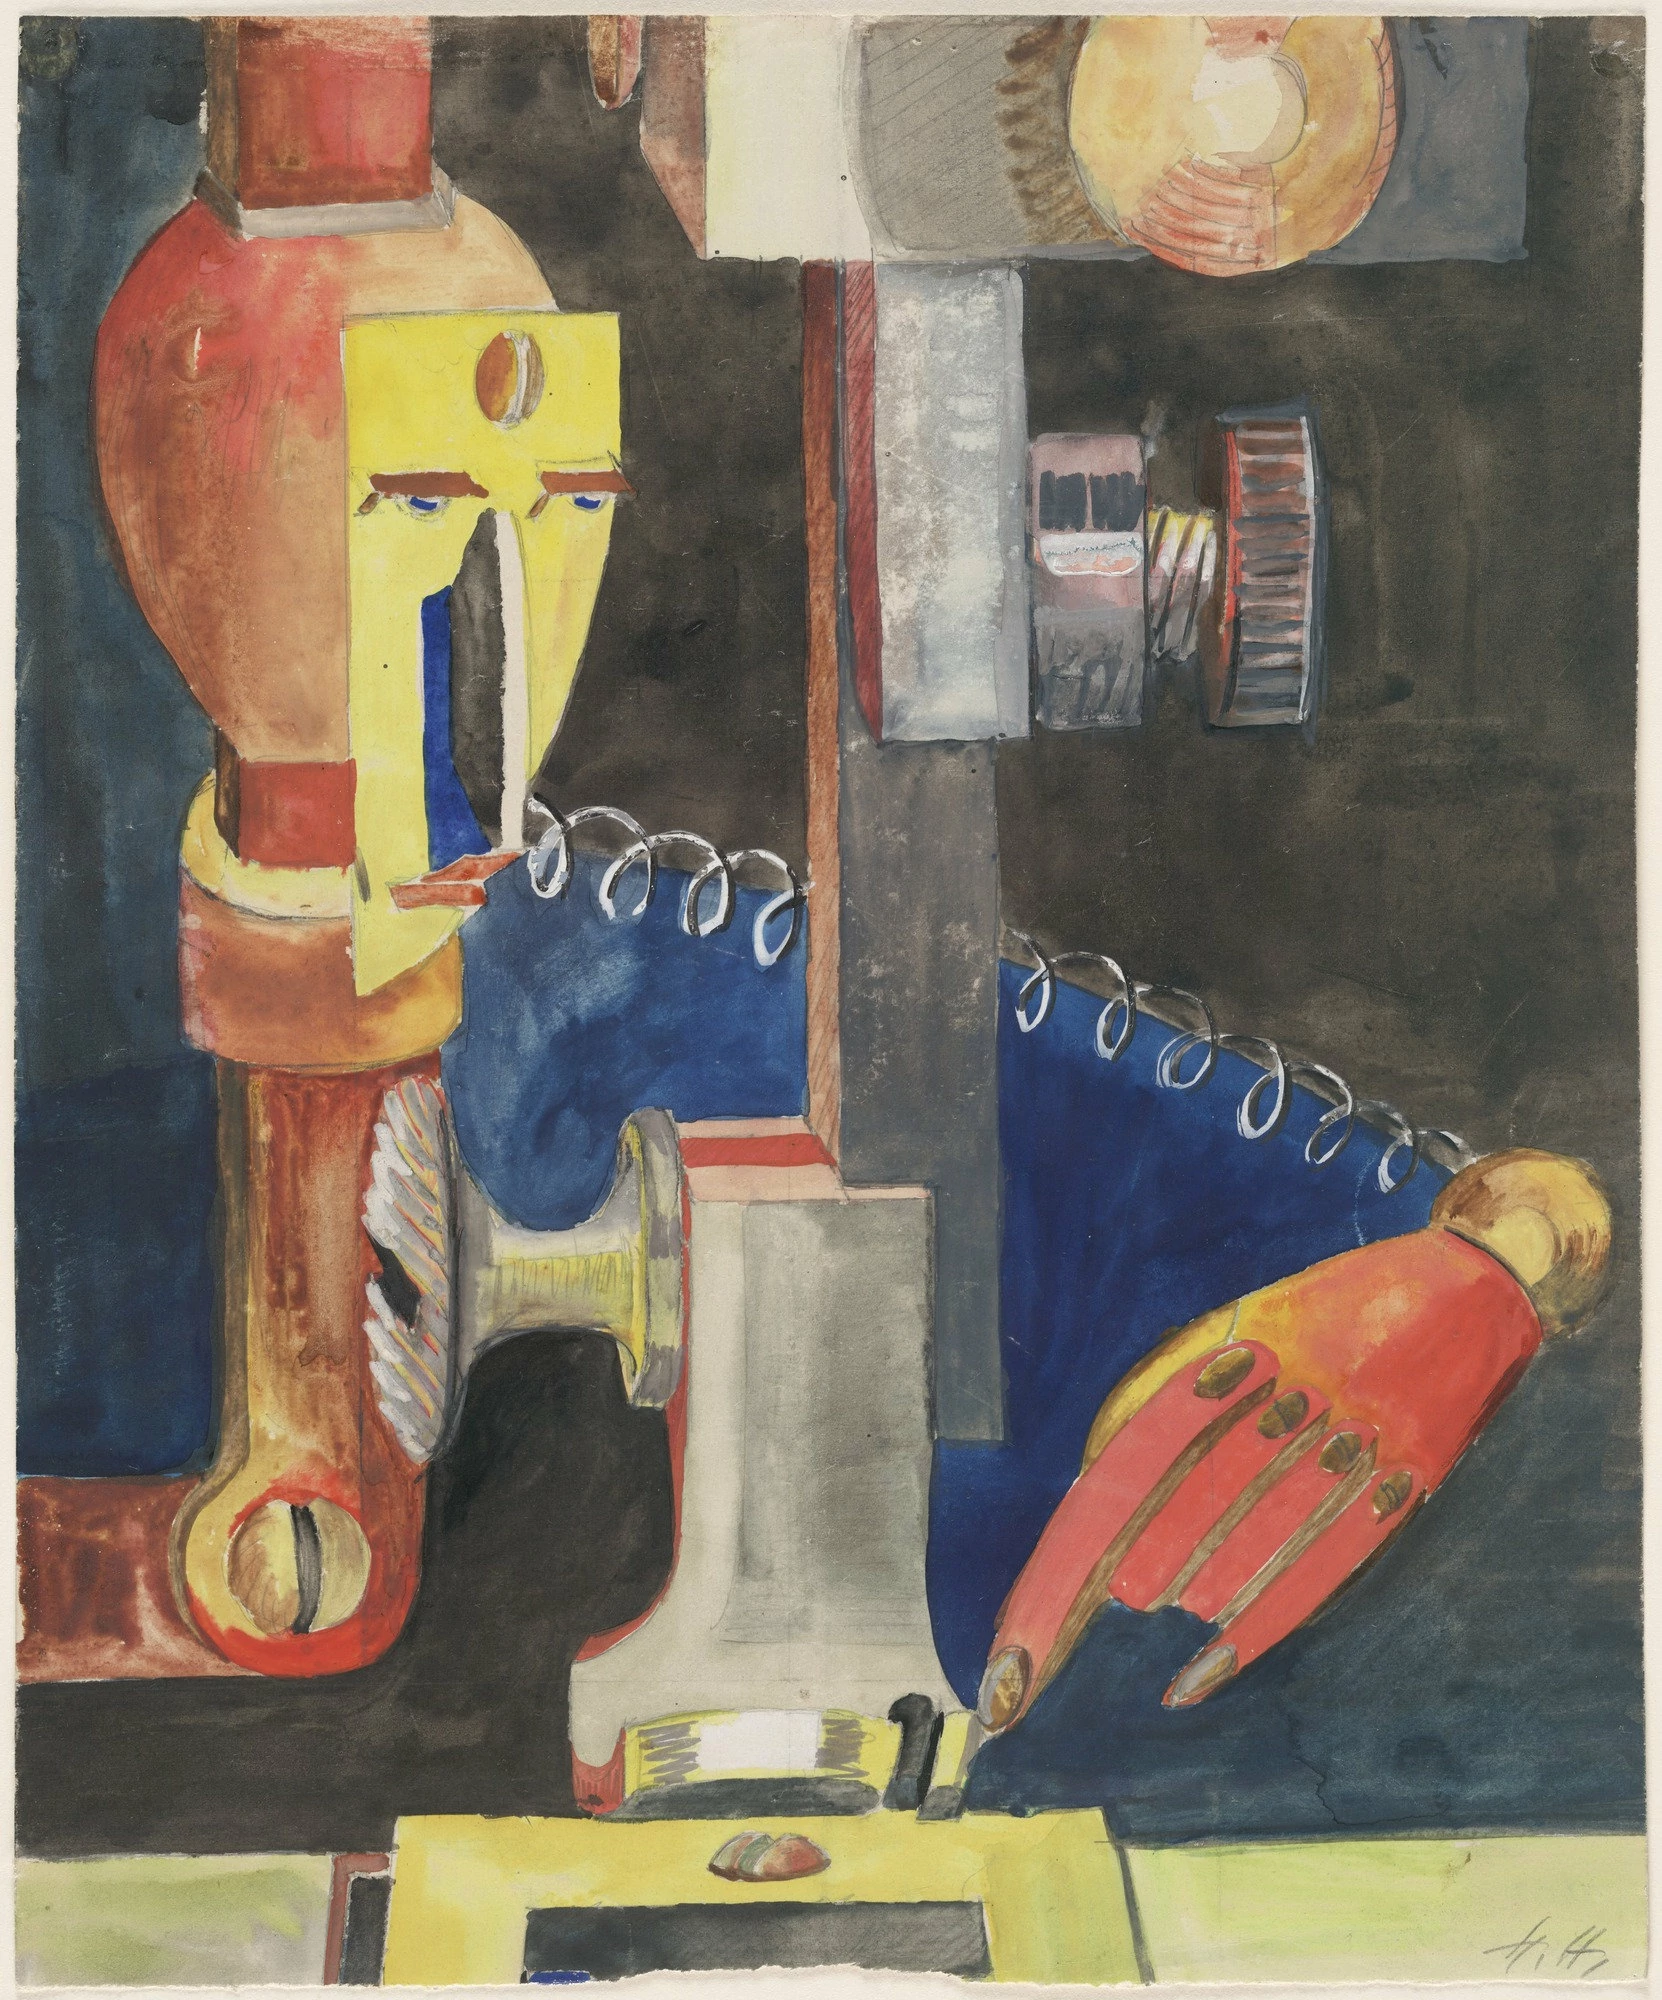 Study for Man and Machine, Hannah Höch